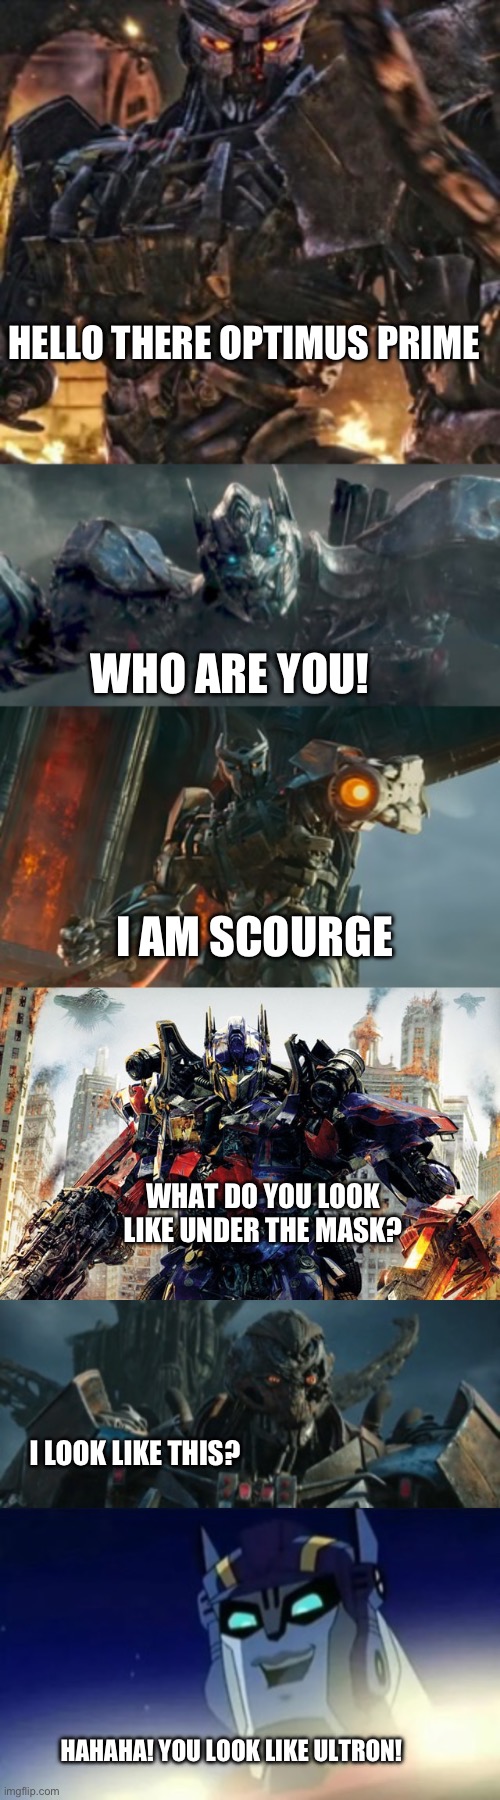 Scourge looks like Ultron | HELLO THERE OPTIMUS PRIME; WHO ARE YOU! I AM SCOURGE; WHAT DO YOU LOOK LIKE UNDER THE MASK? I LOOK LIKE THIS? HAHAHA! YOU LOOK LIKE ULTRON! | image tagged in transformers | made w/ Imgflip meme maker